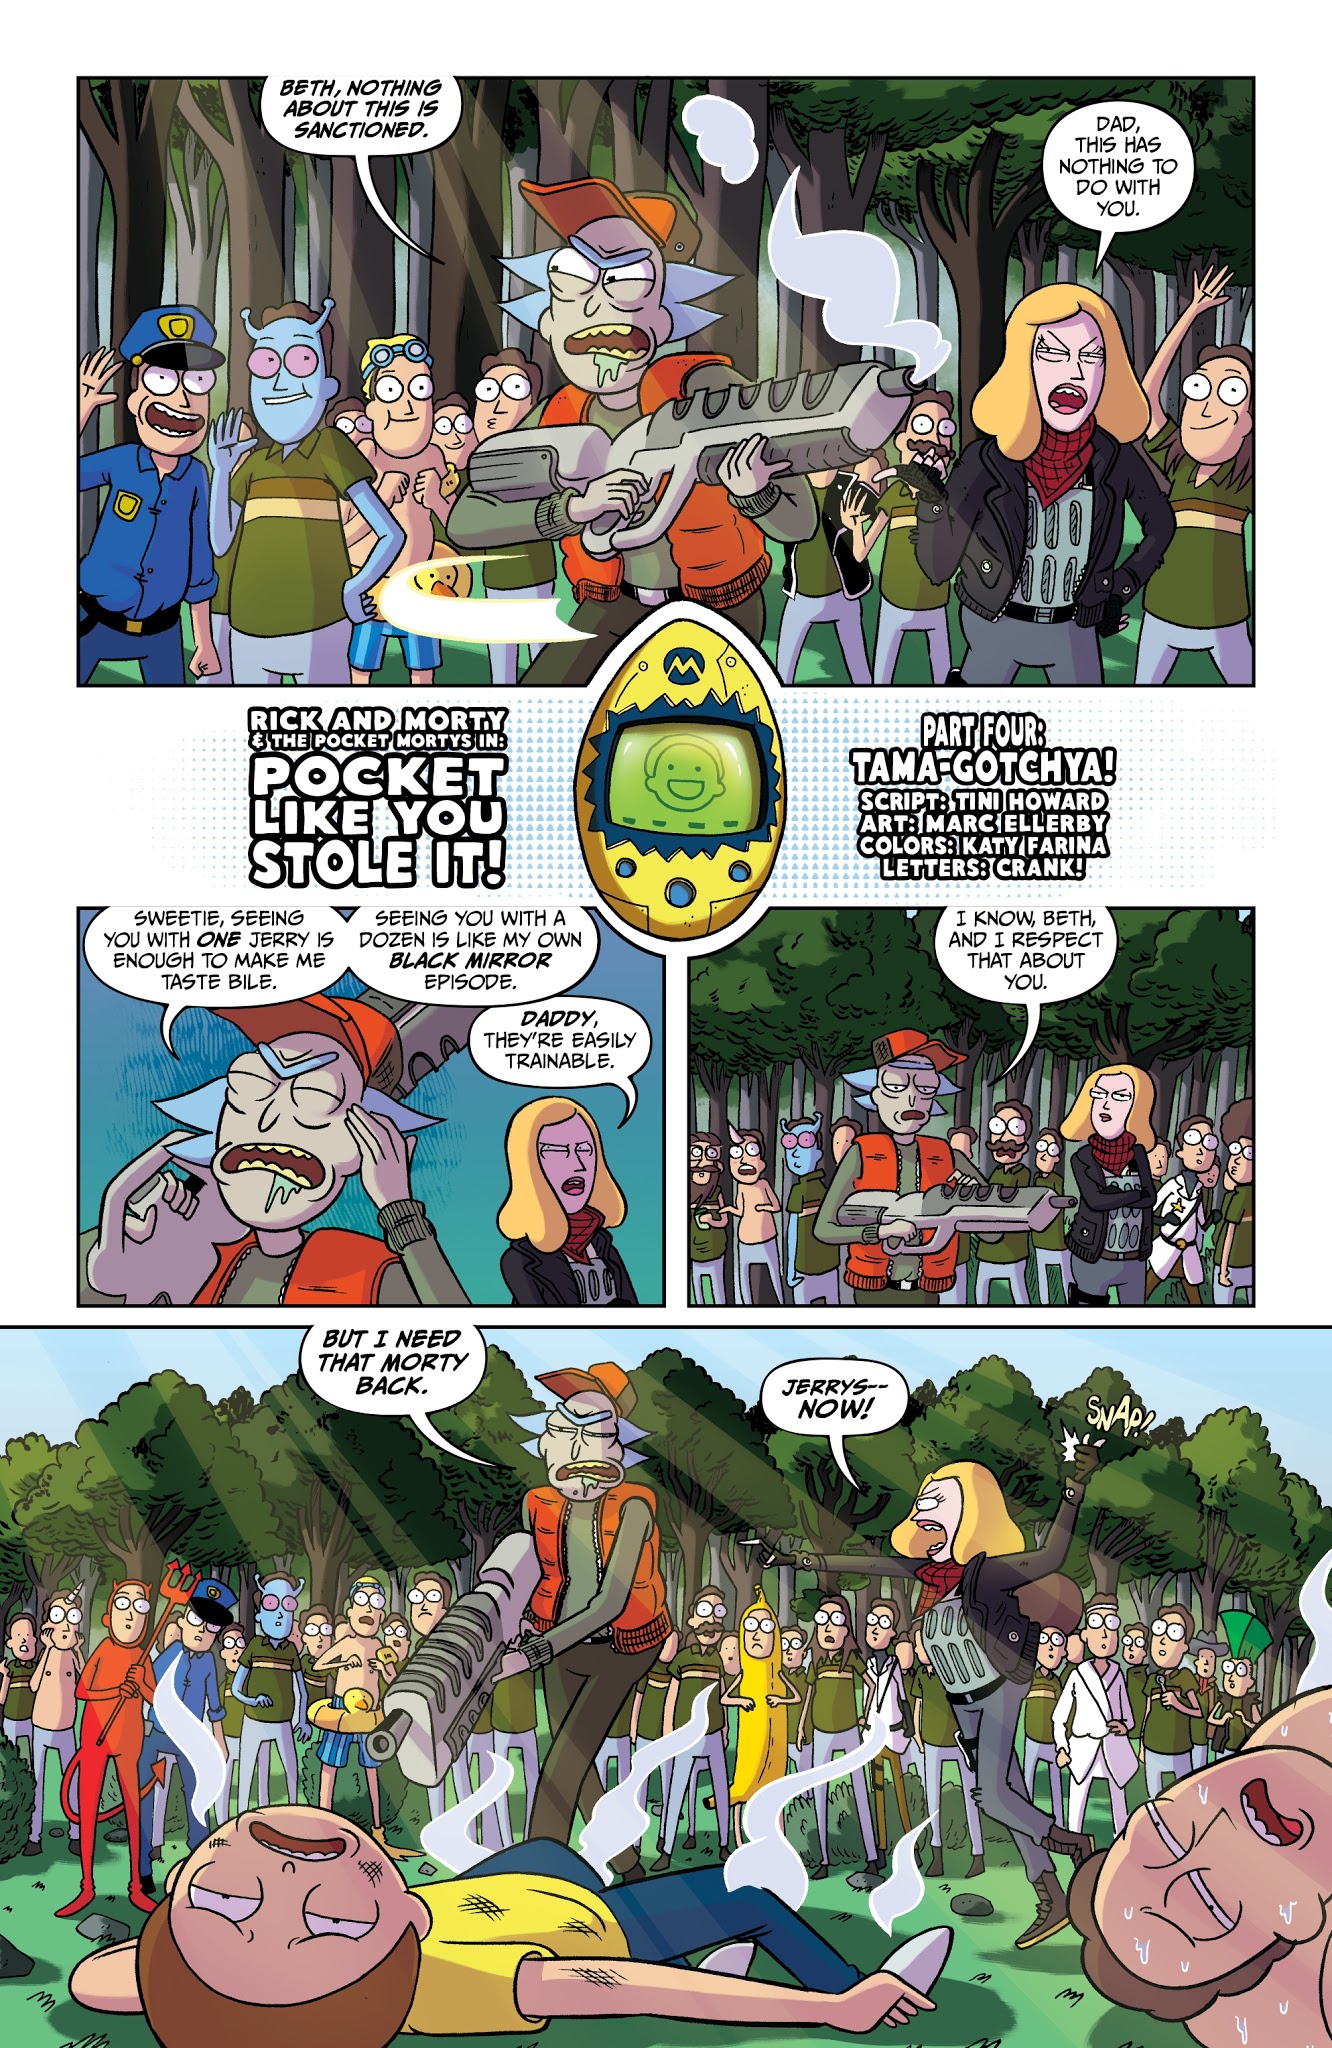 Read online Rick and Morty: Pocket Like You Stole It comic -  Issue #4 - 3